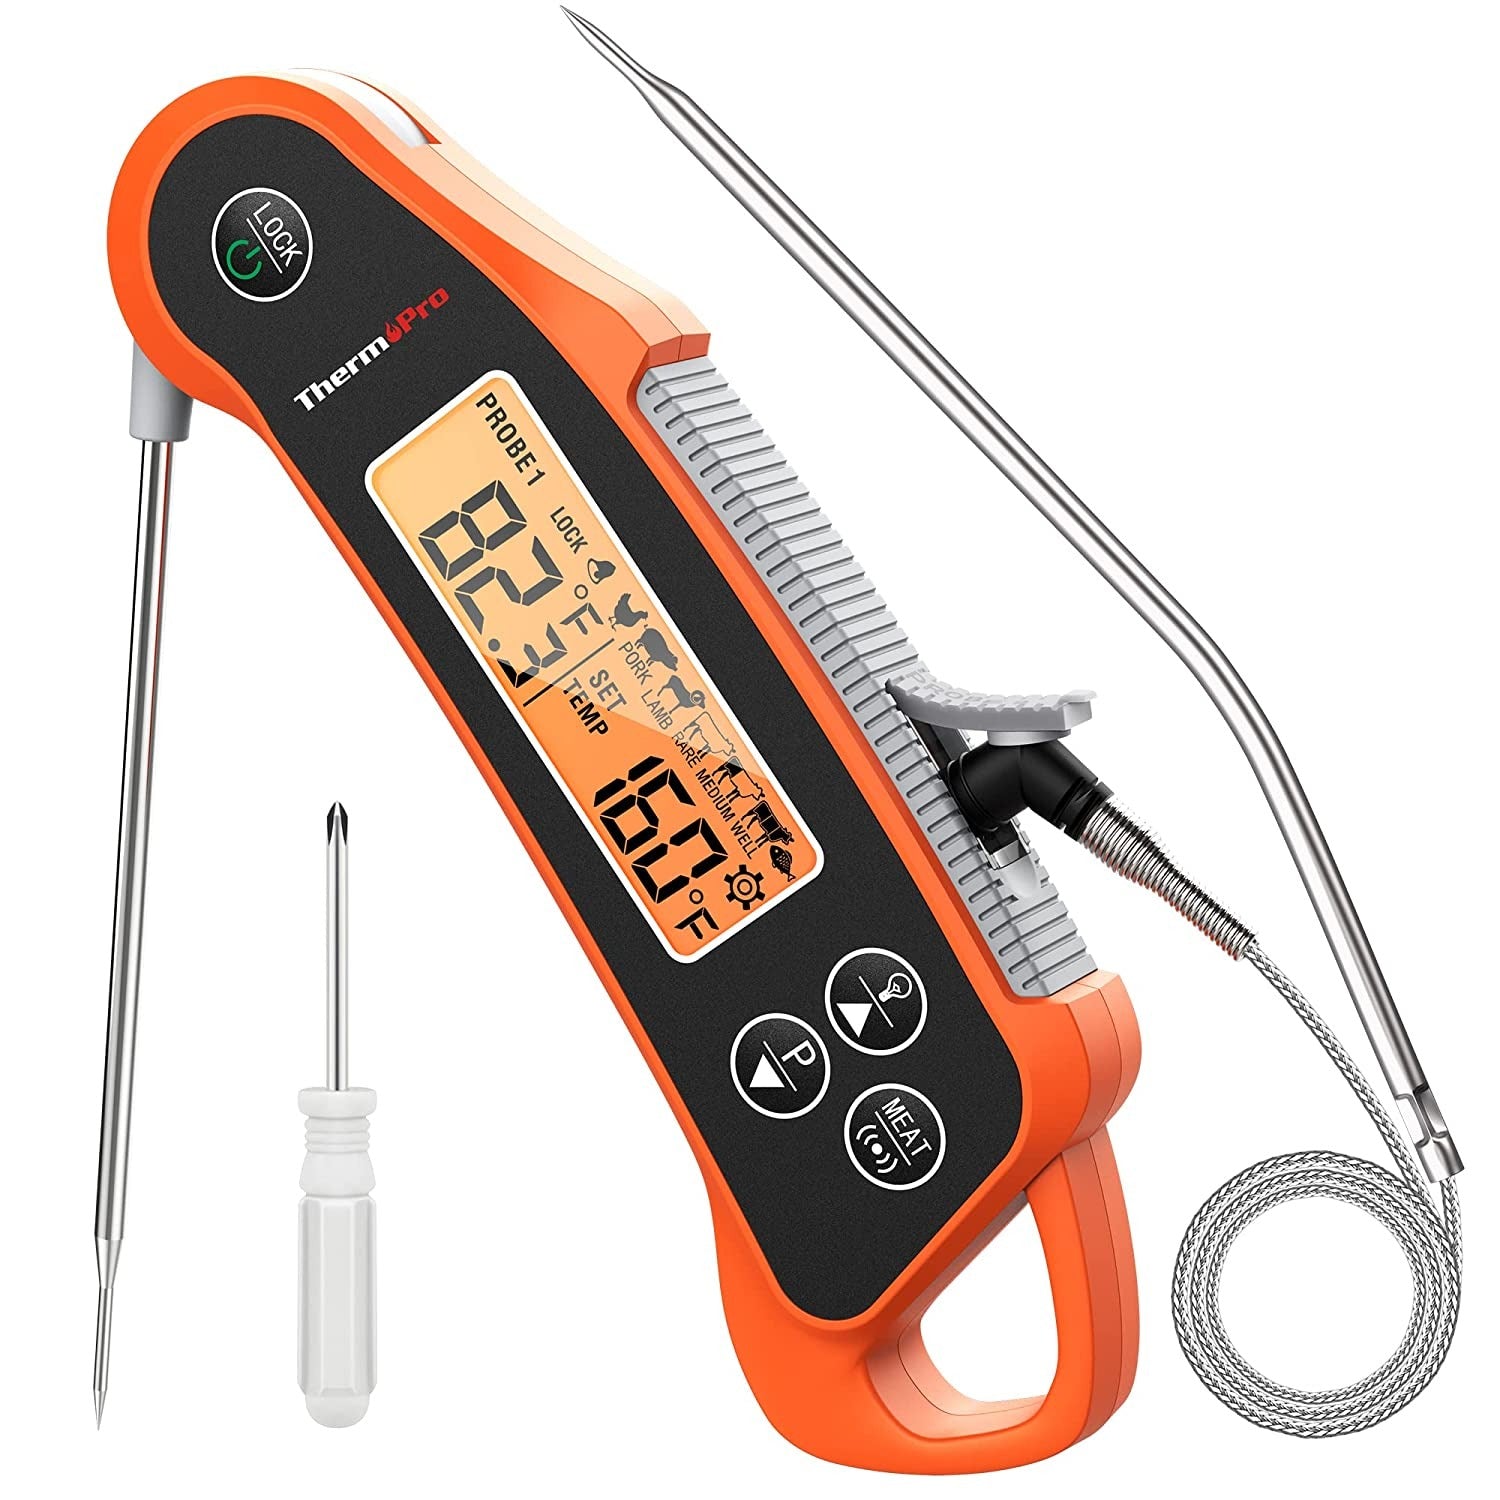 ThermoPro Bluetooth Dual Probe Digital Meat Thermometer Black